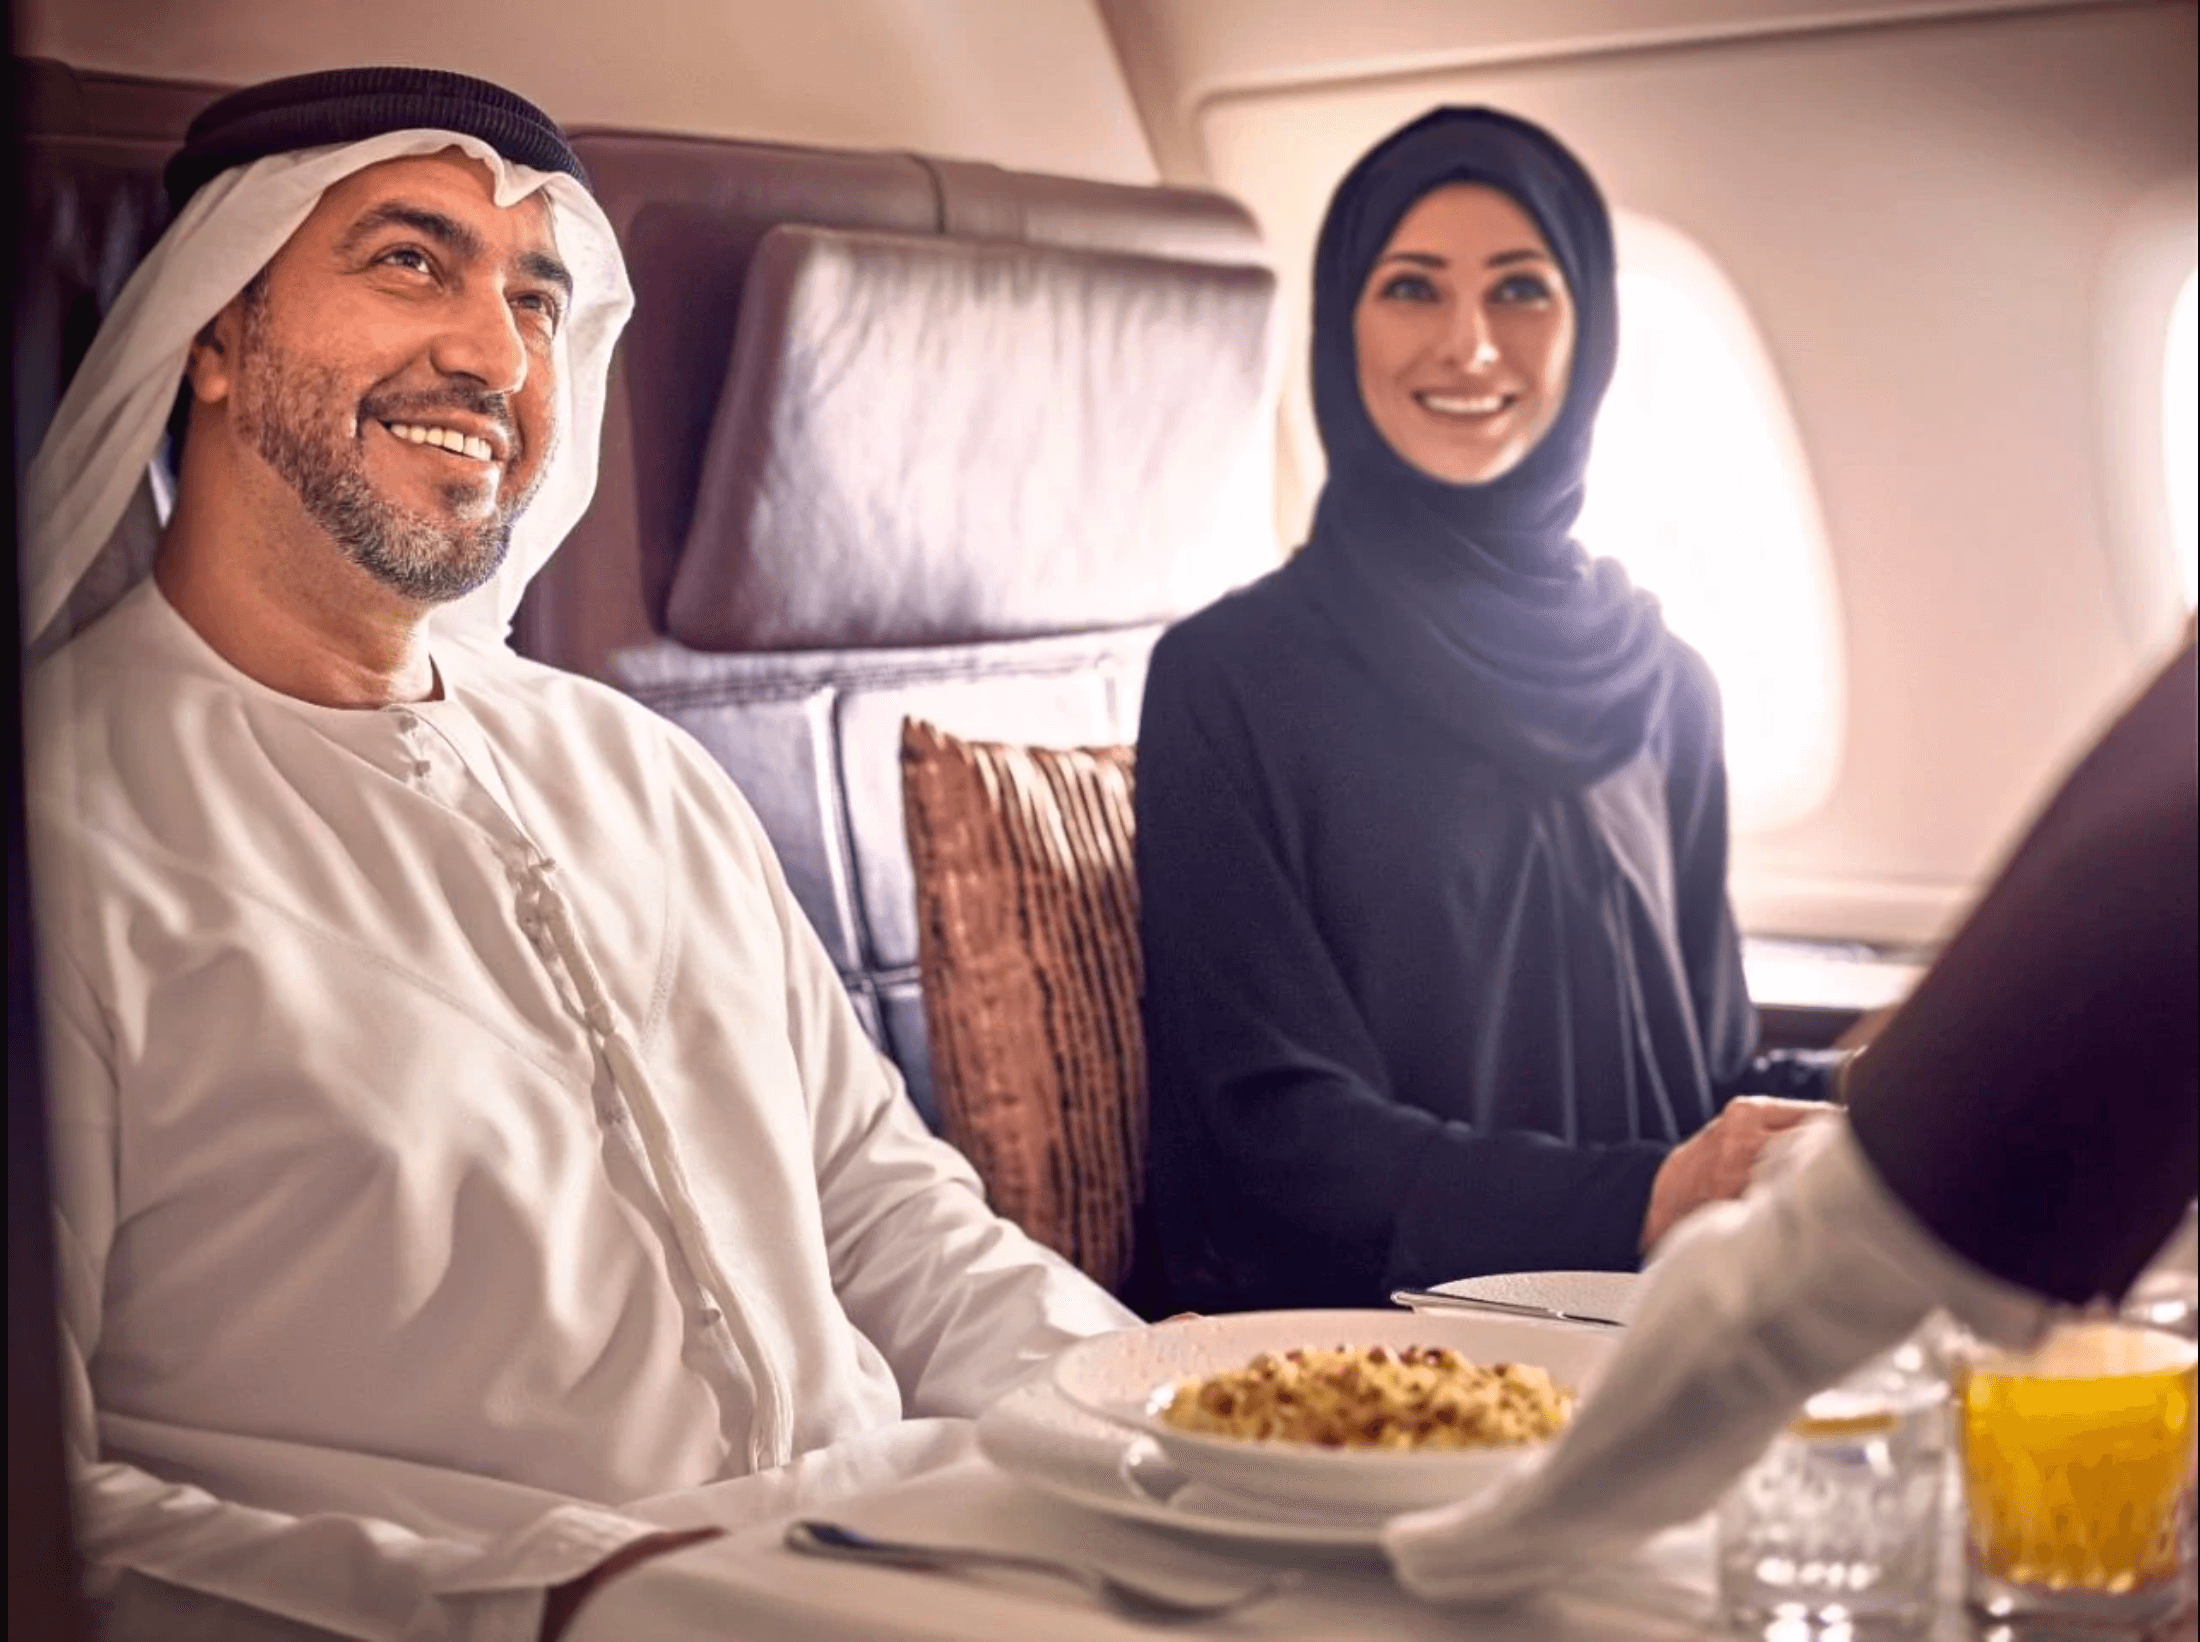 the residence emirati couple served food